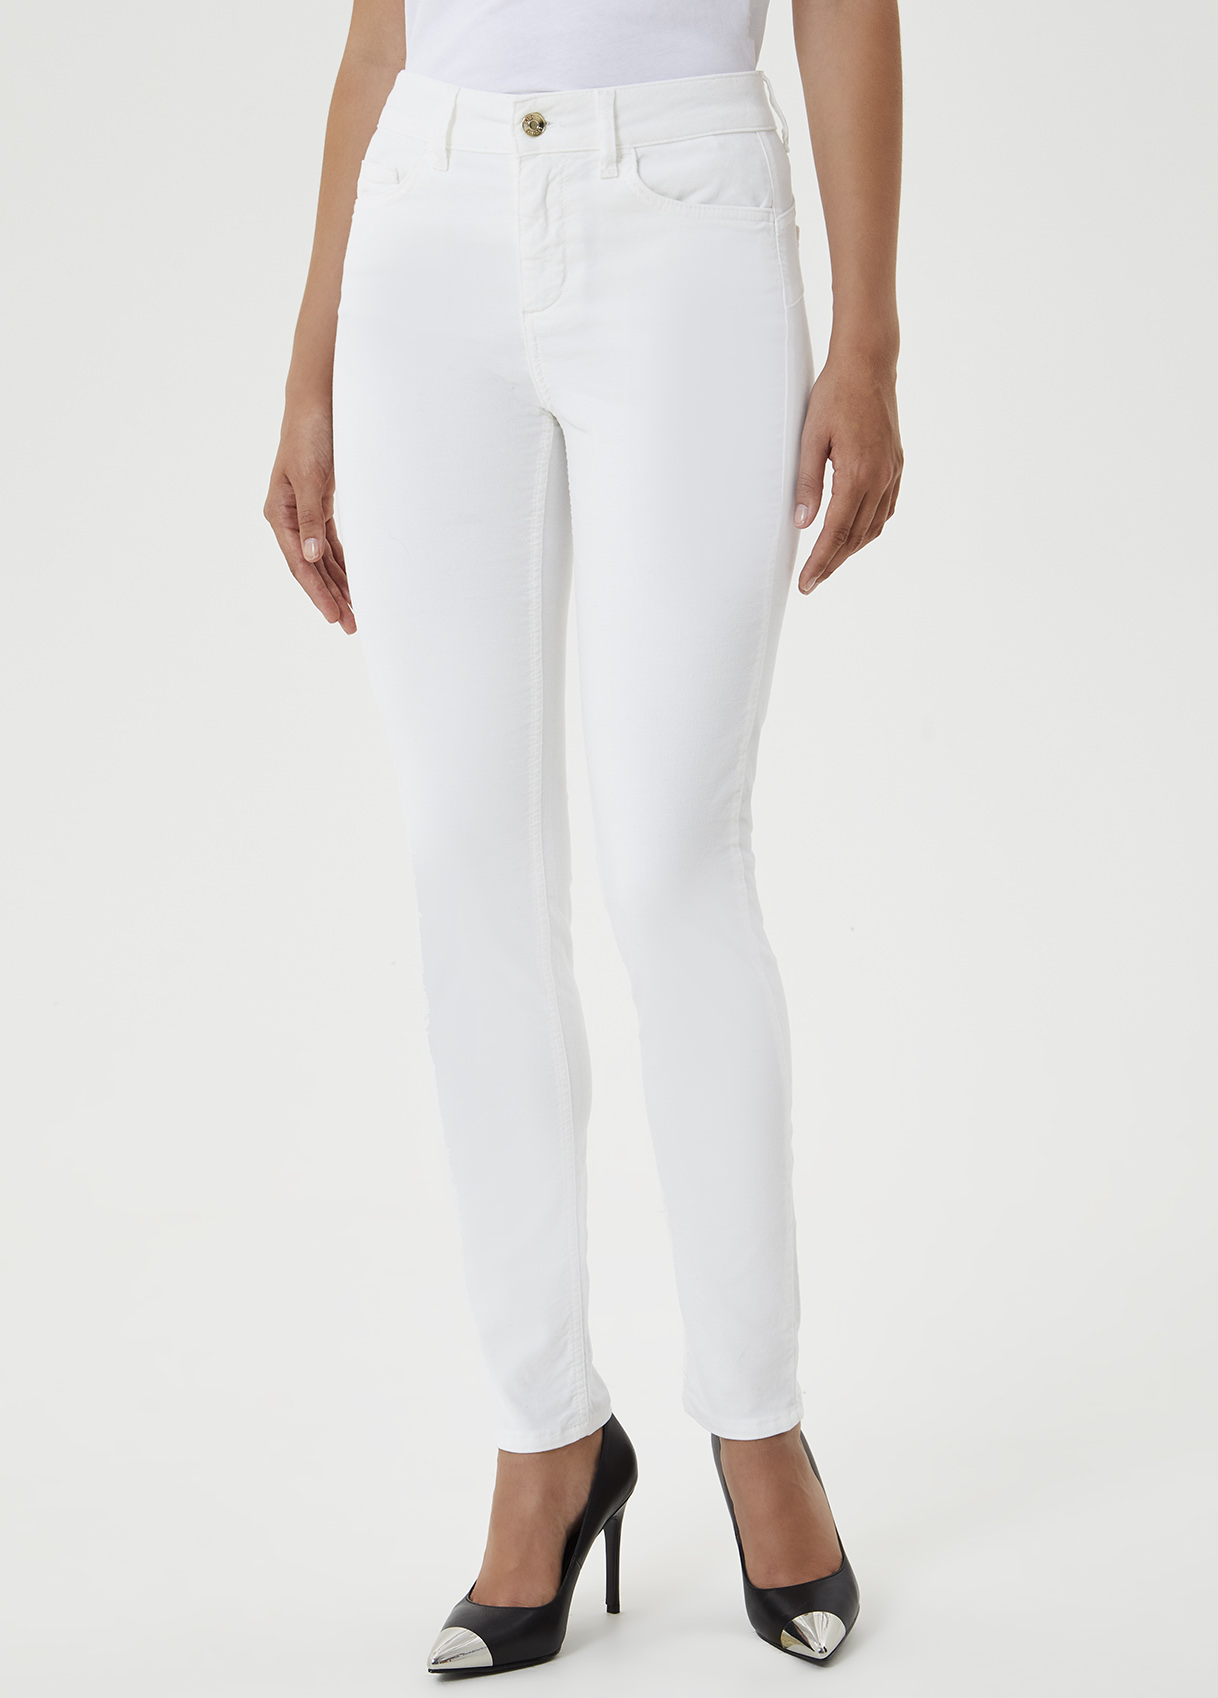 Slim Trousers in the size 27 for Women on sale  FASHIOLAin